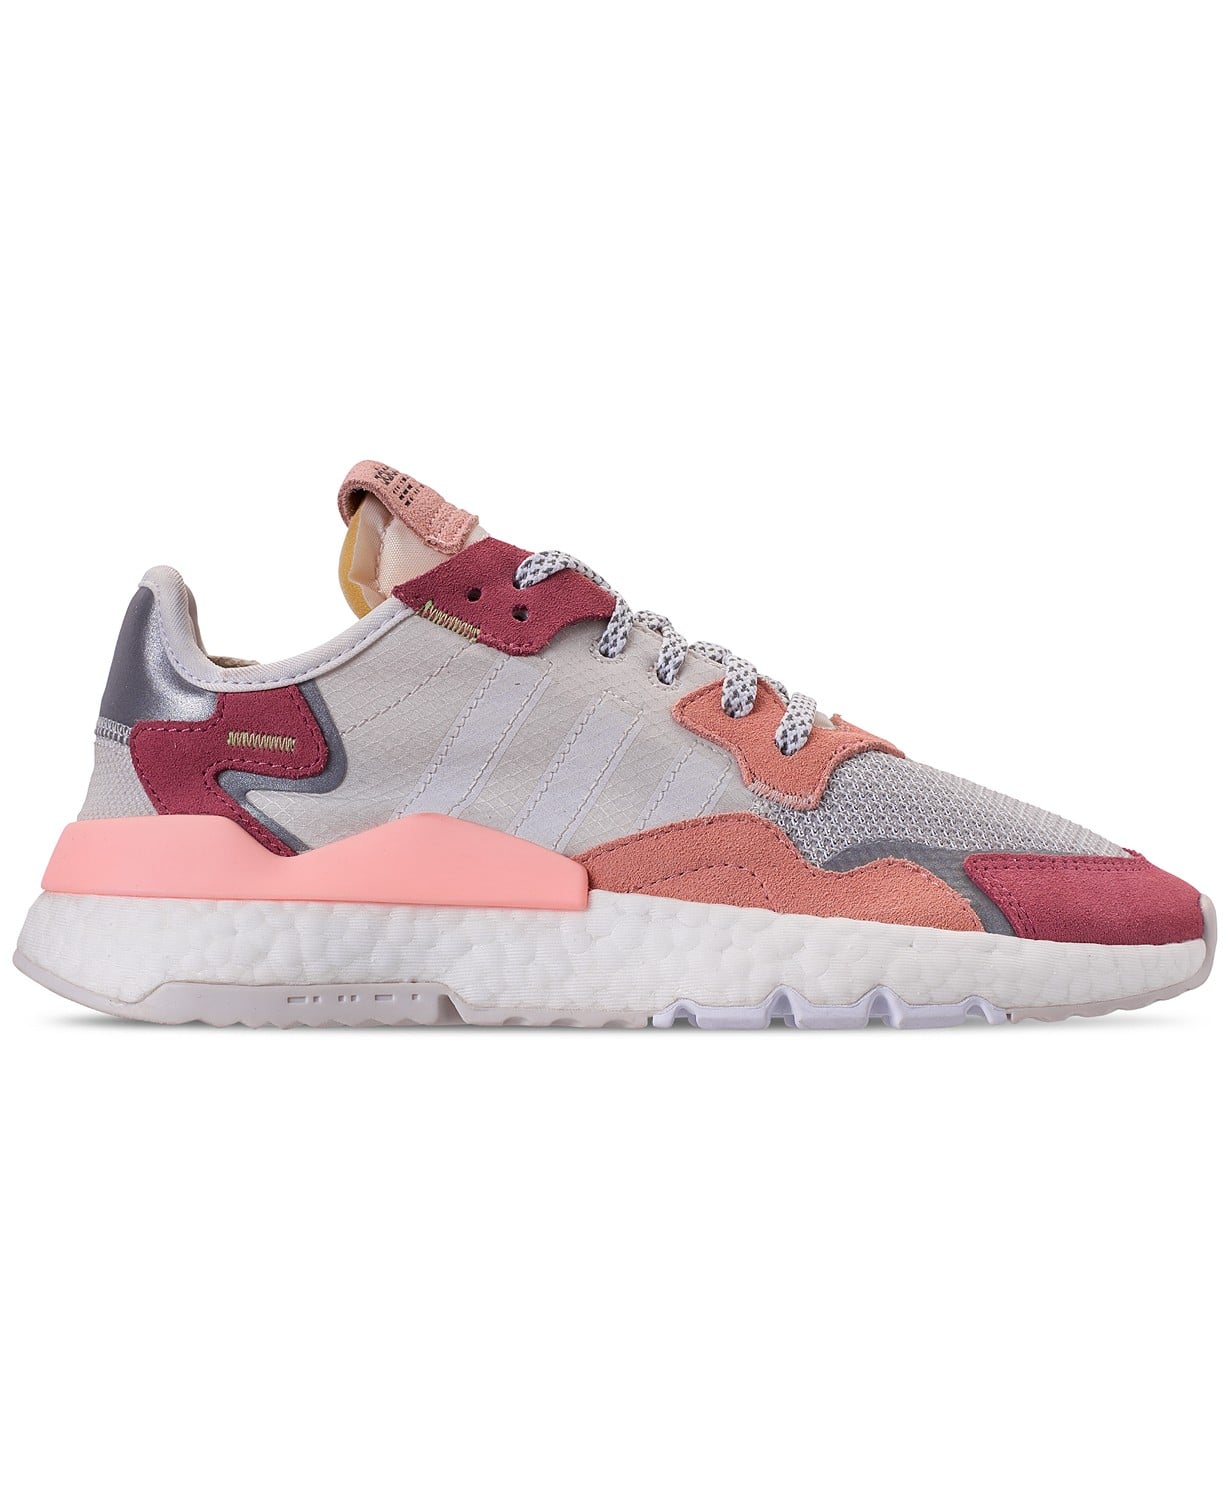 Uitbeelding temperatuur Bloesem Adidas Originals Nite Jogger Sneakers | 18 Cute New Sneakers That'll Take  Your Fall 2019 Shoe Game to the Next Level | POPSUGAR Fashion Photo 19